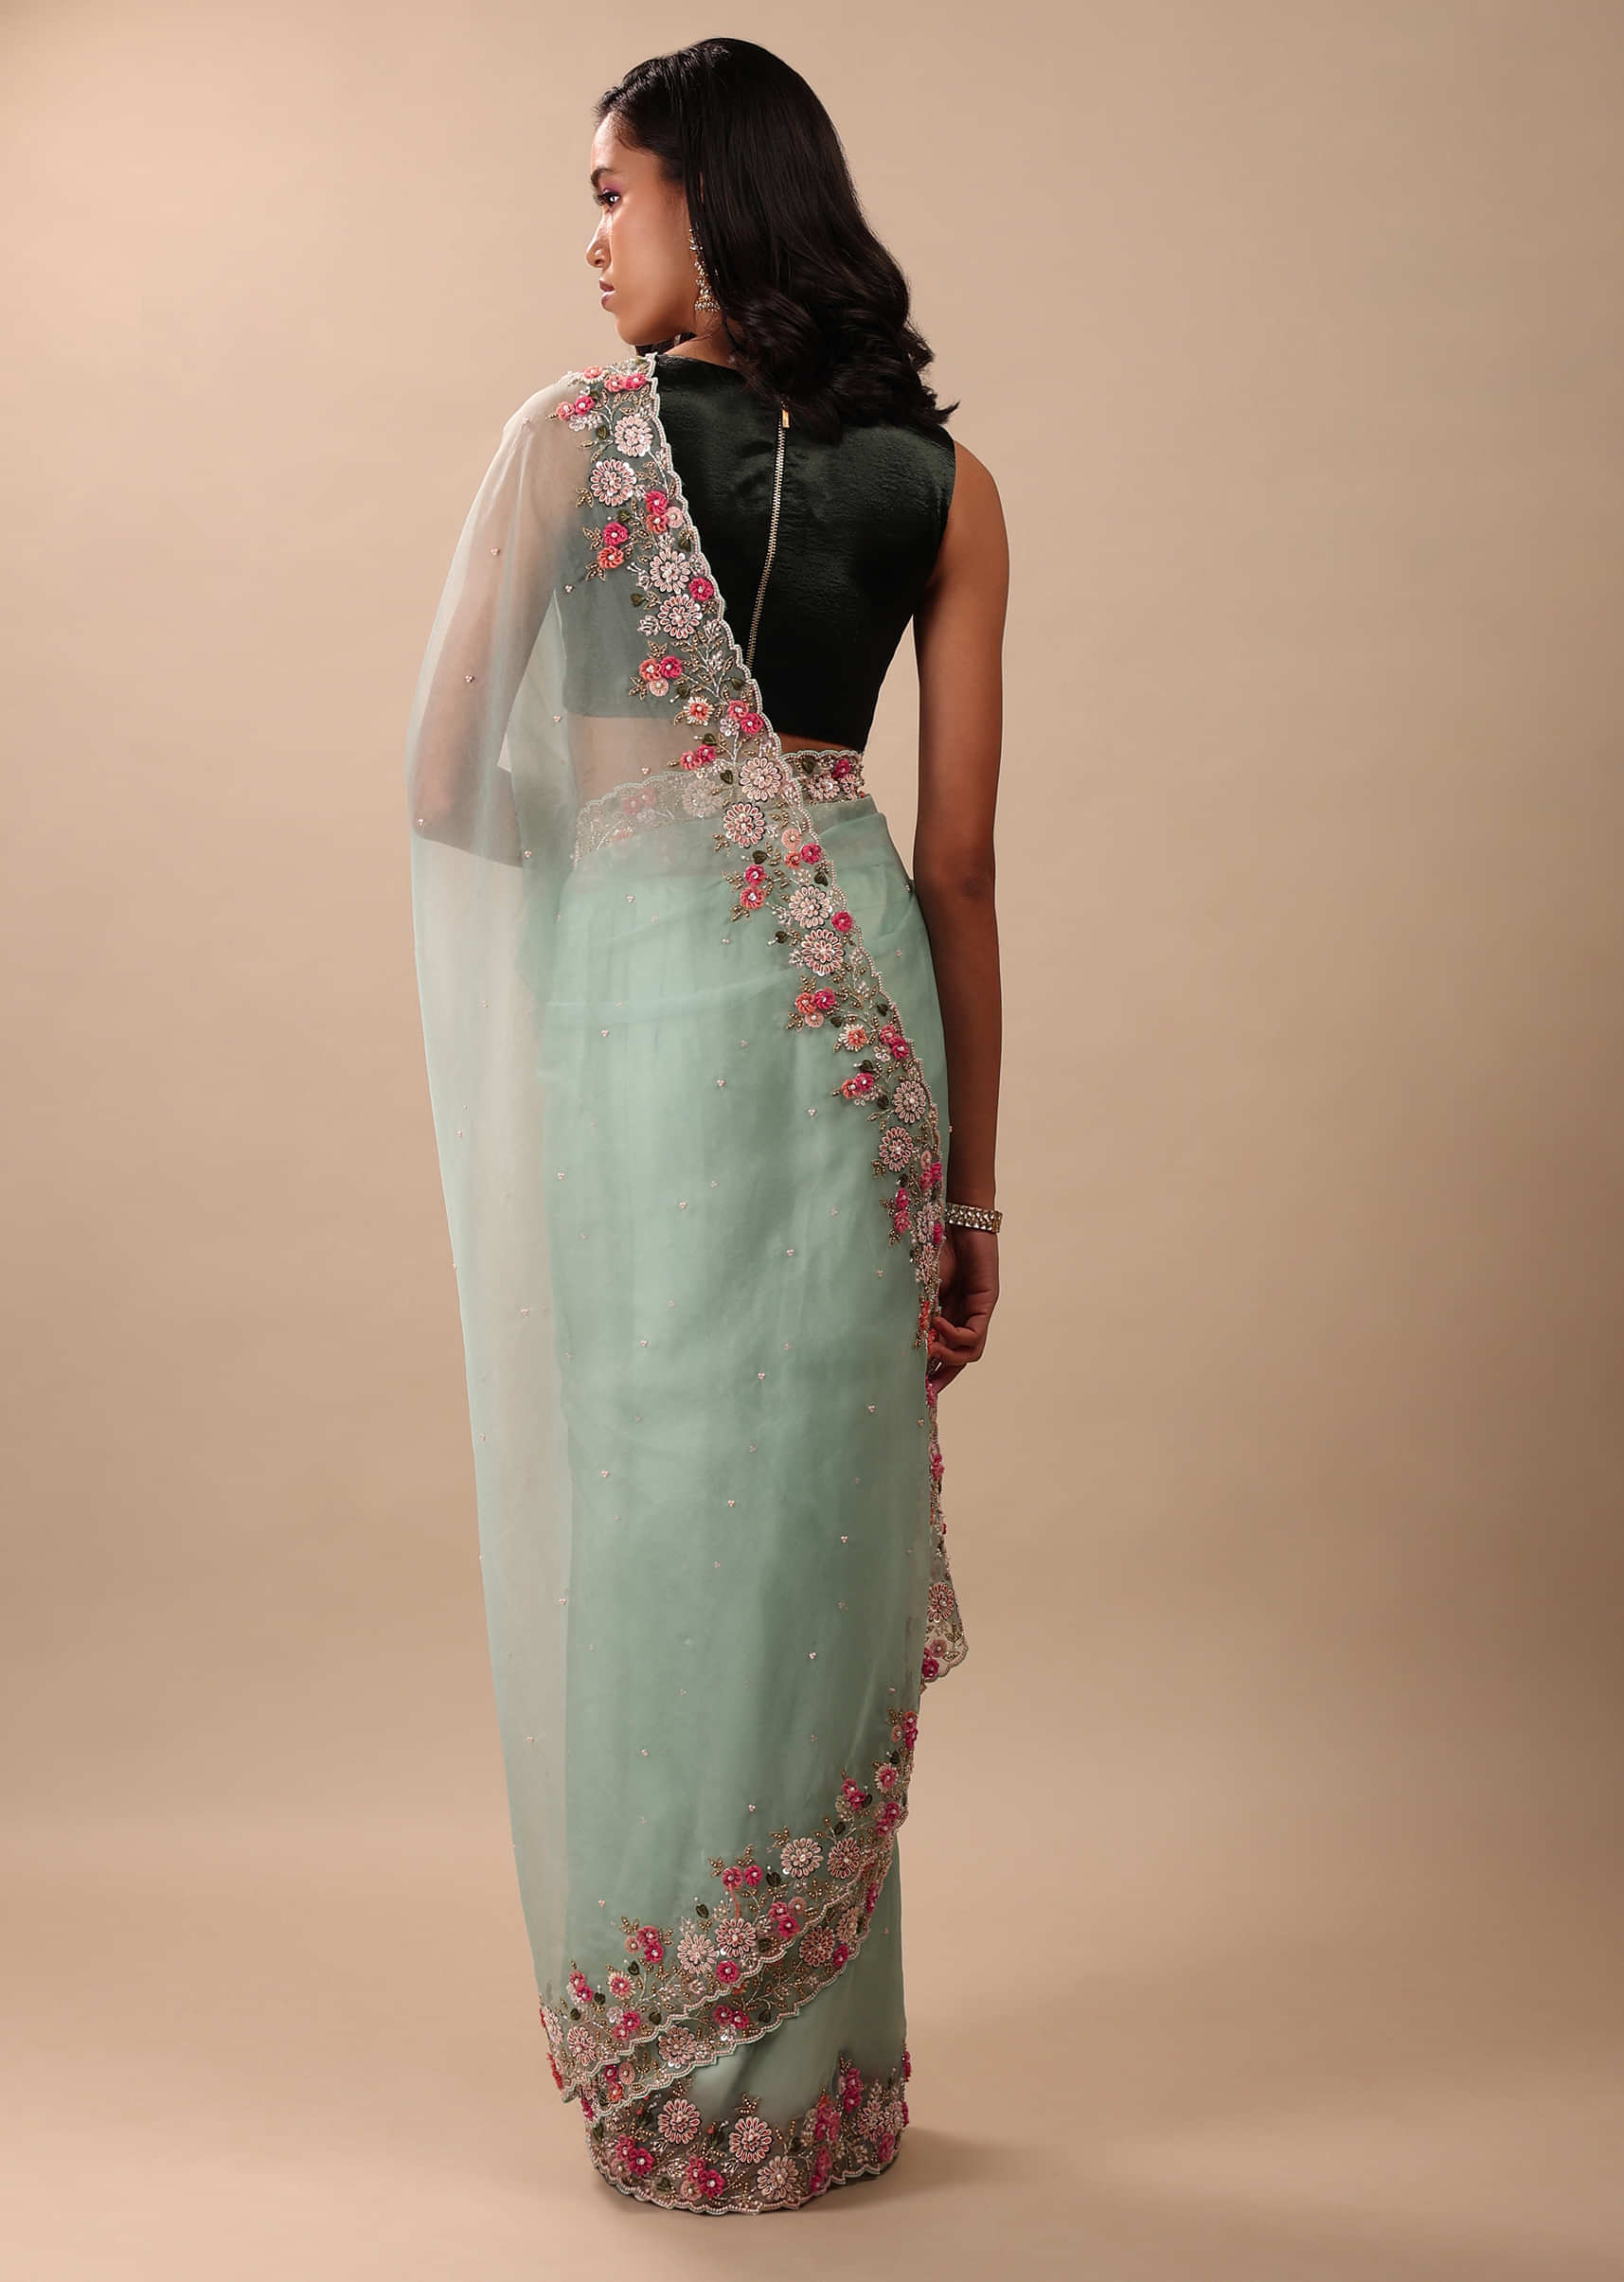 Aqua Blue Saree In Organza With 3D Floral Embroidery In Thread, Zardosi & French Knots